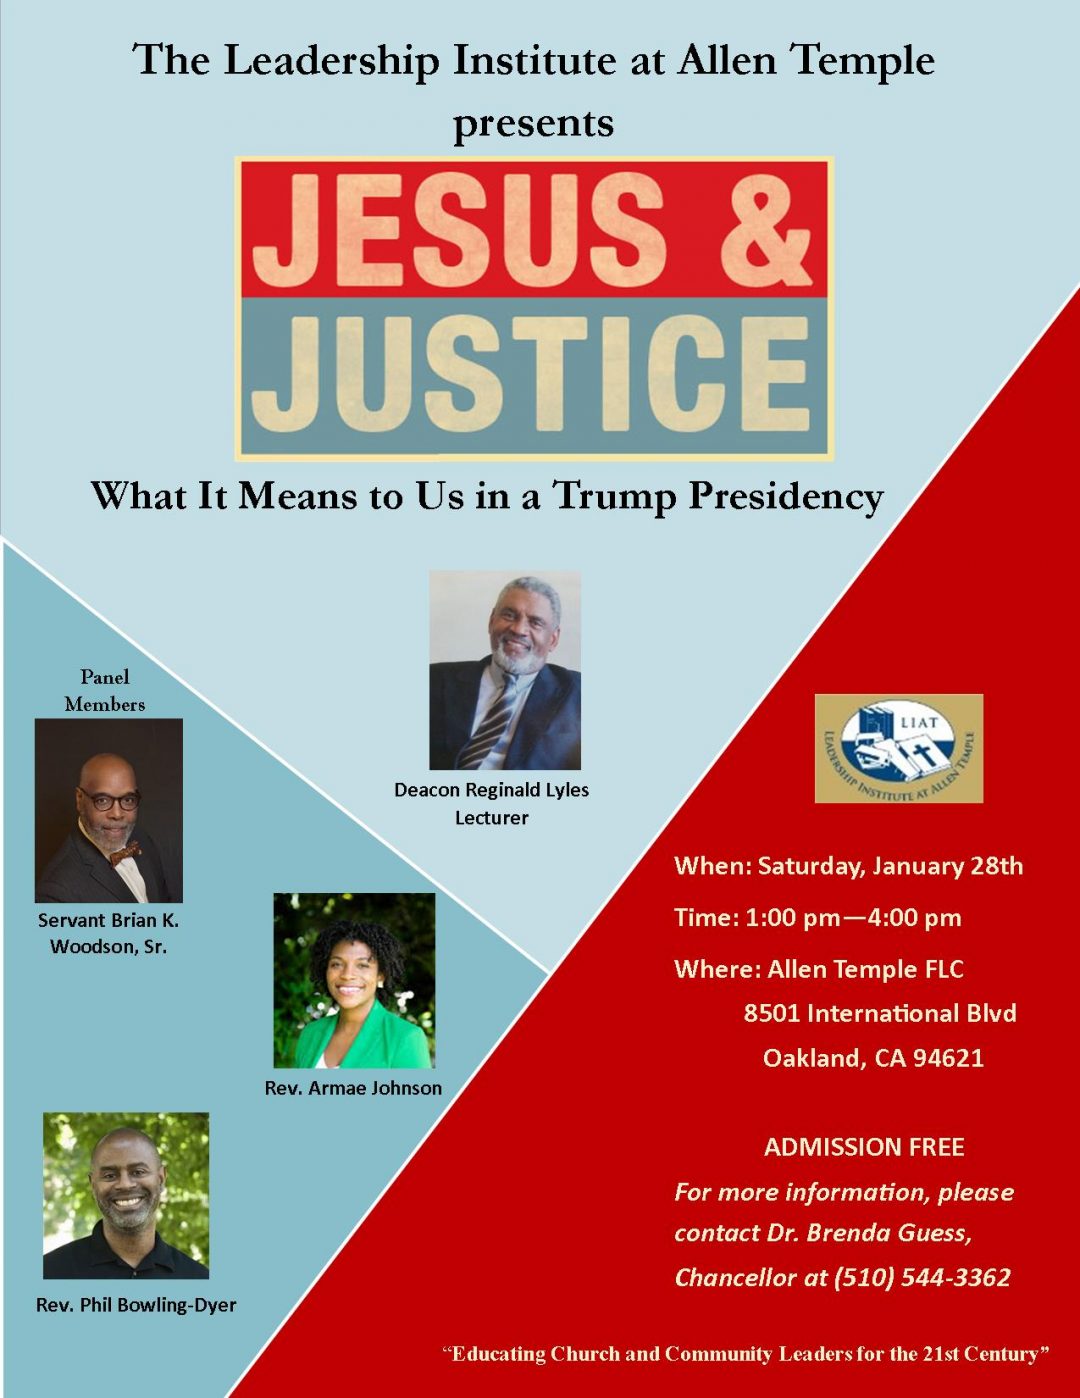 Jesus & Justice: What It Means to Us in a Trump Presidency